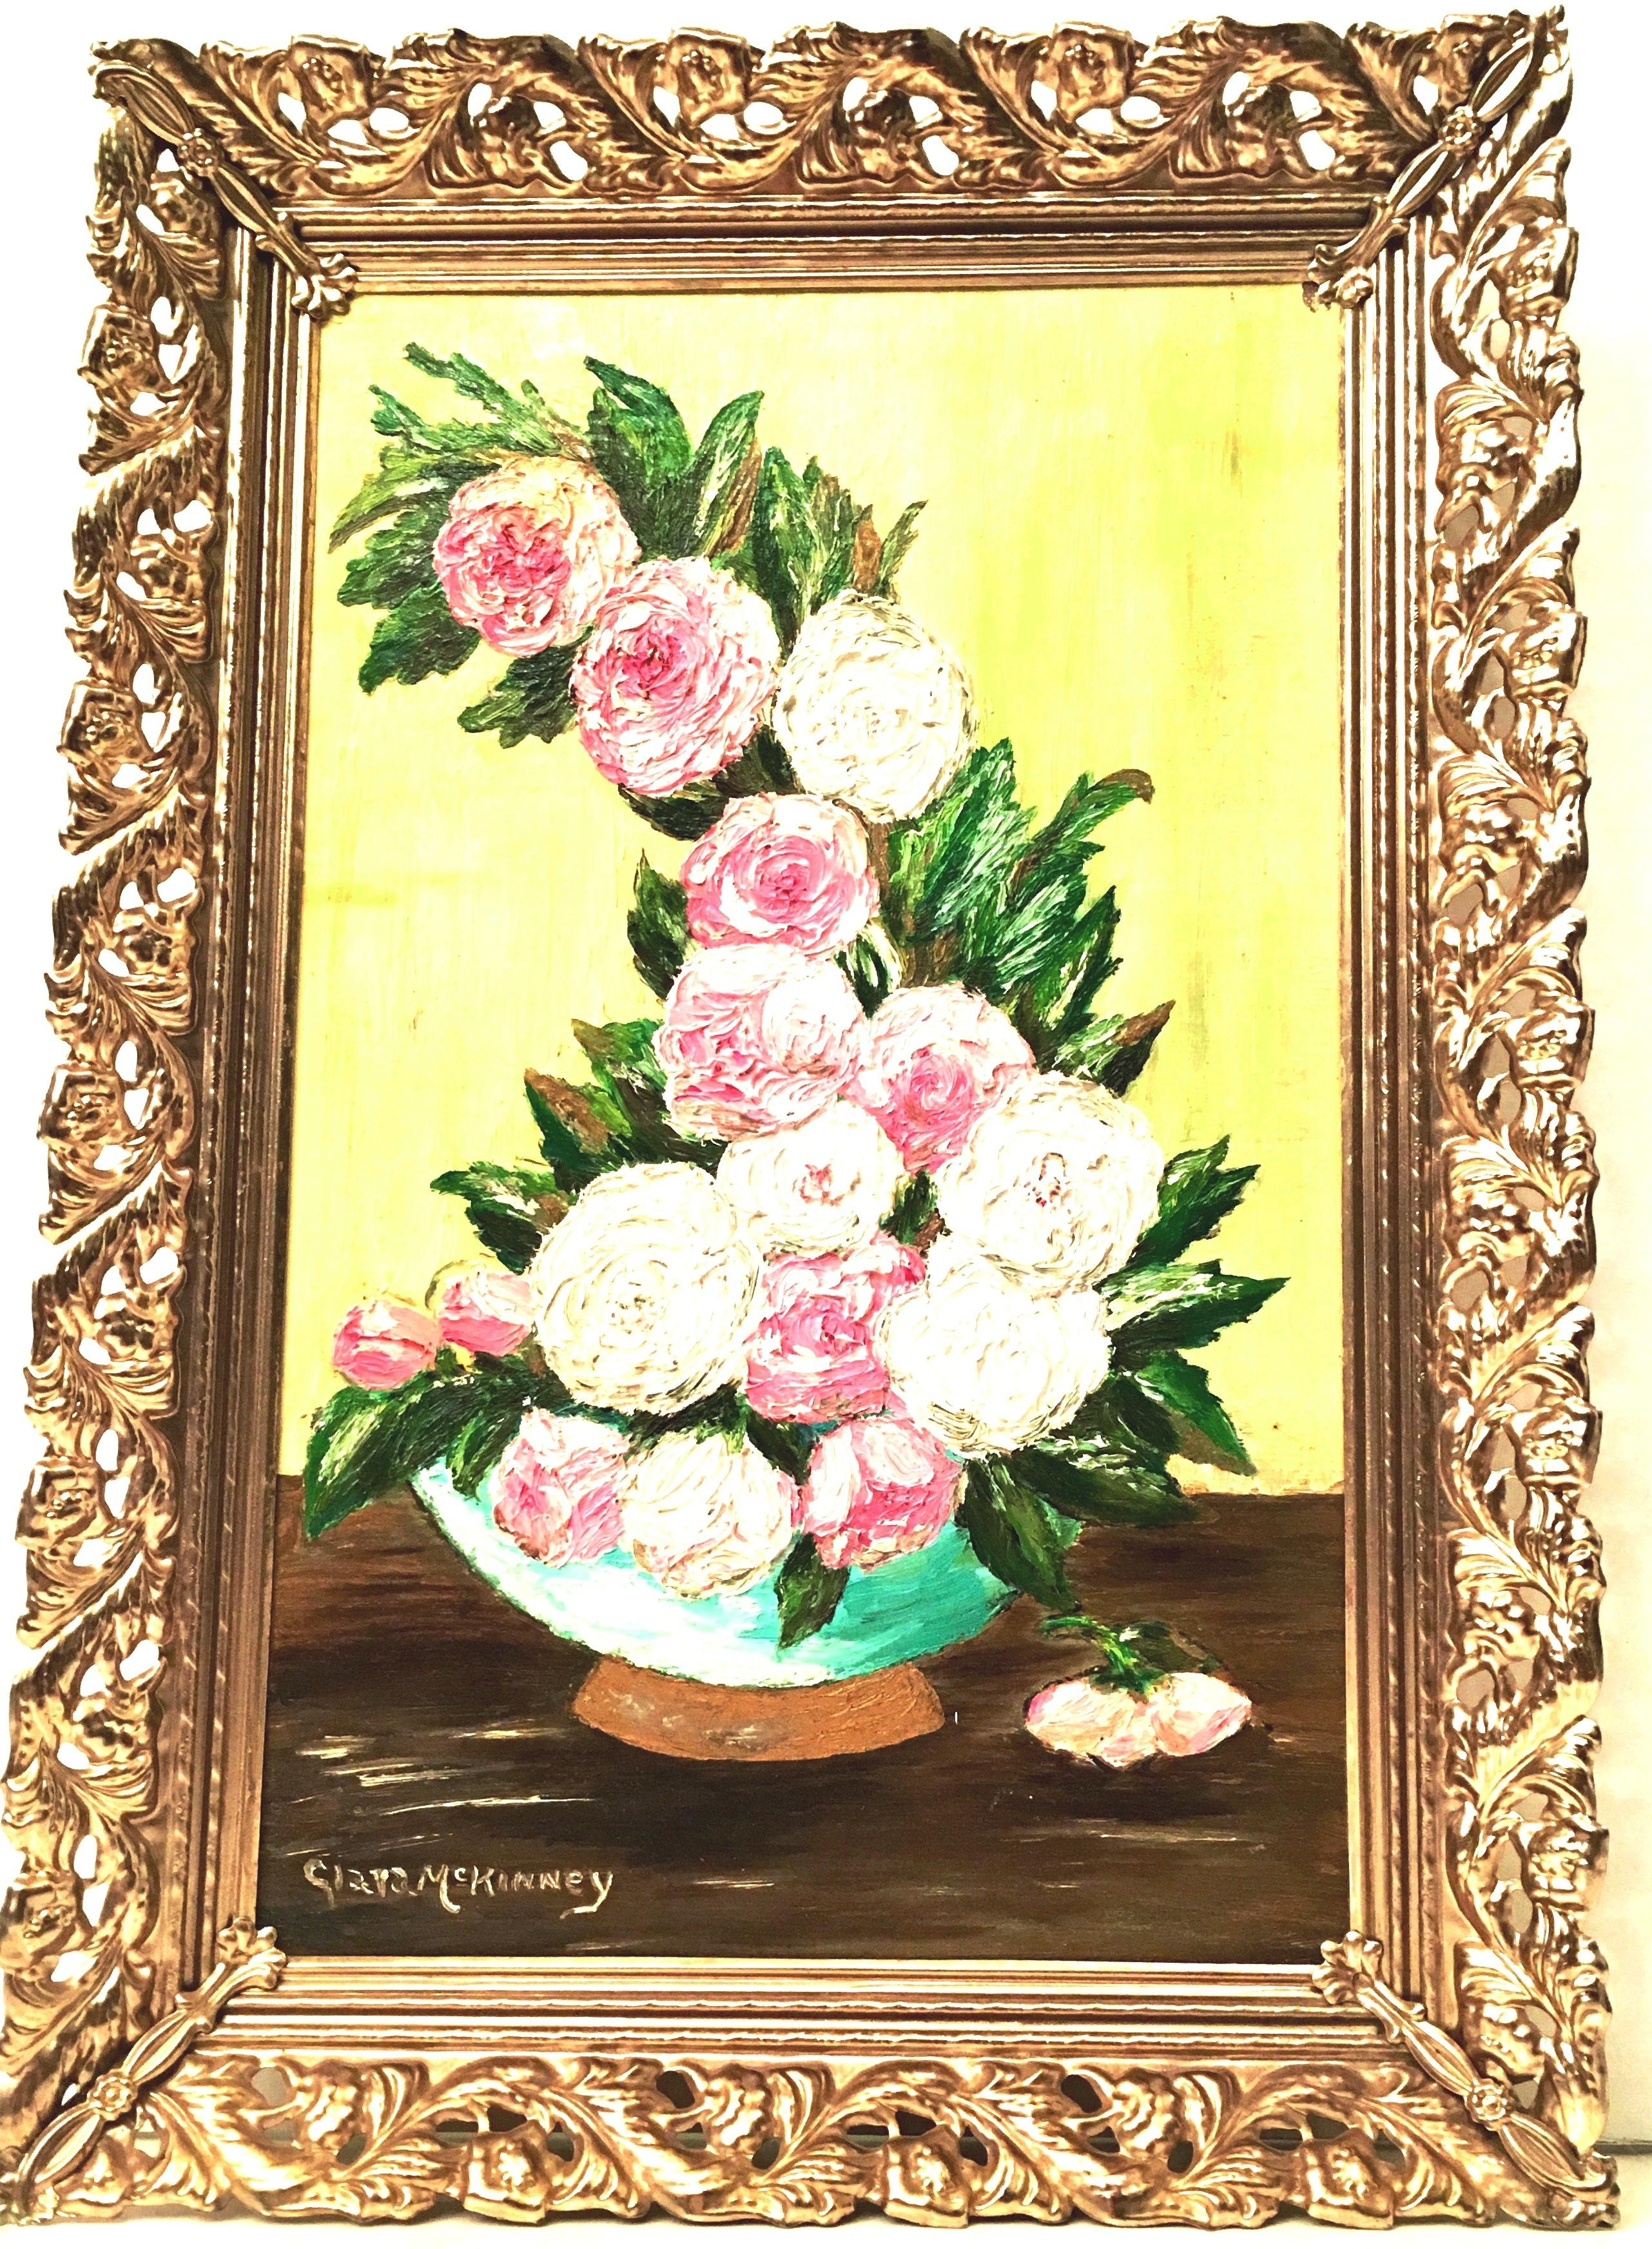 1960s original oil on canvas board painting by, Clara McKinney. This diminutive and dramatic textured still life vase and bouquet of flowers motif has a vivid yellow and brown ground. The vase is turquoise with gilt gold detail. Beautifully framed